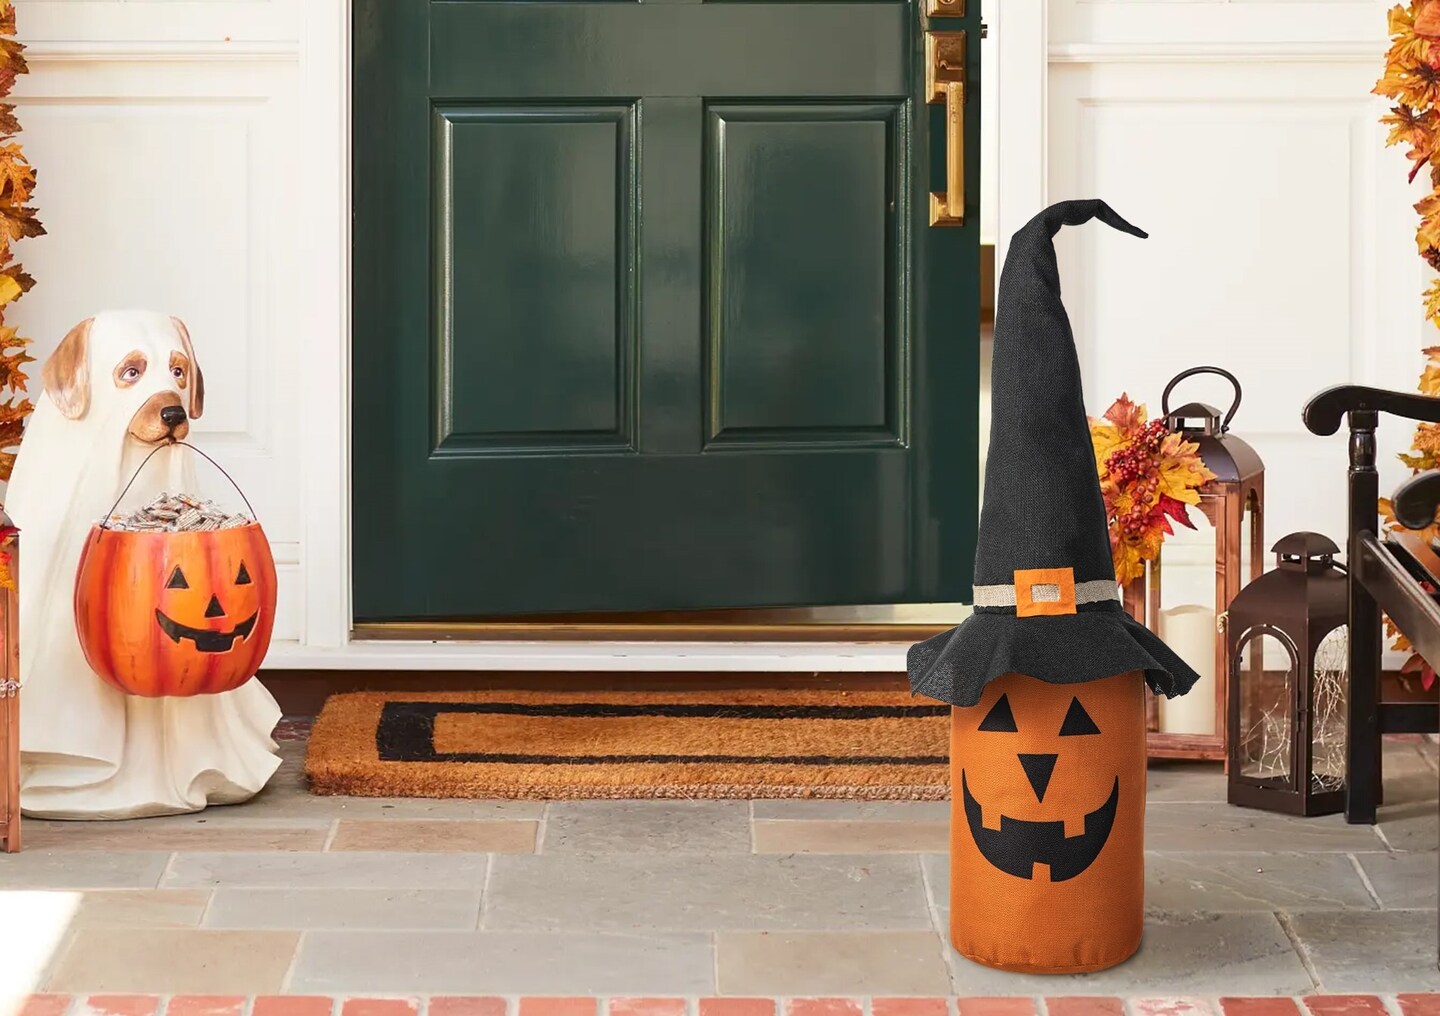 Porch with pumpkin decorations and a decorative dog with a ghost costume